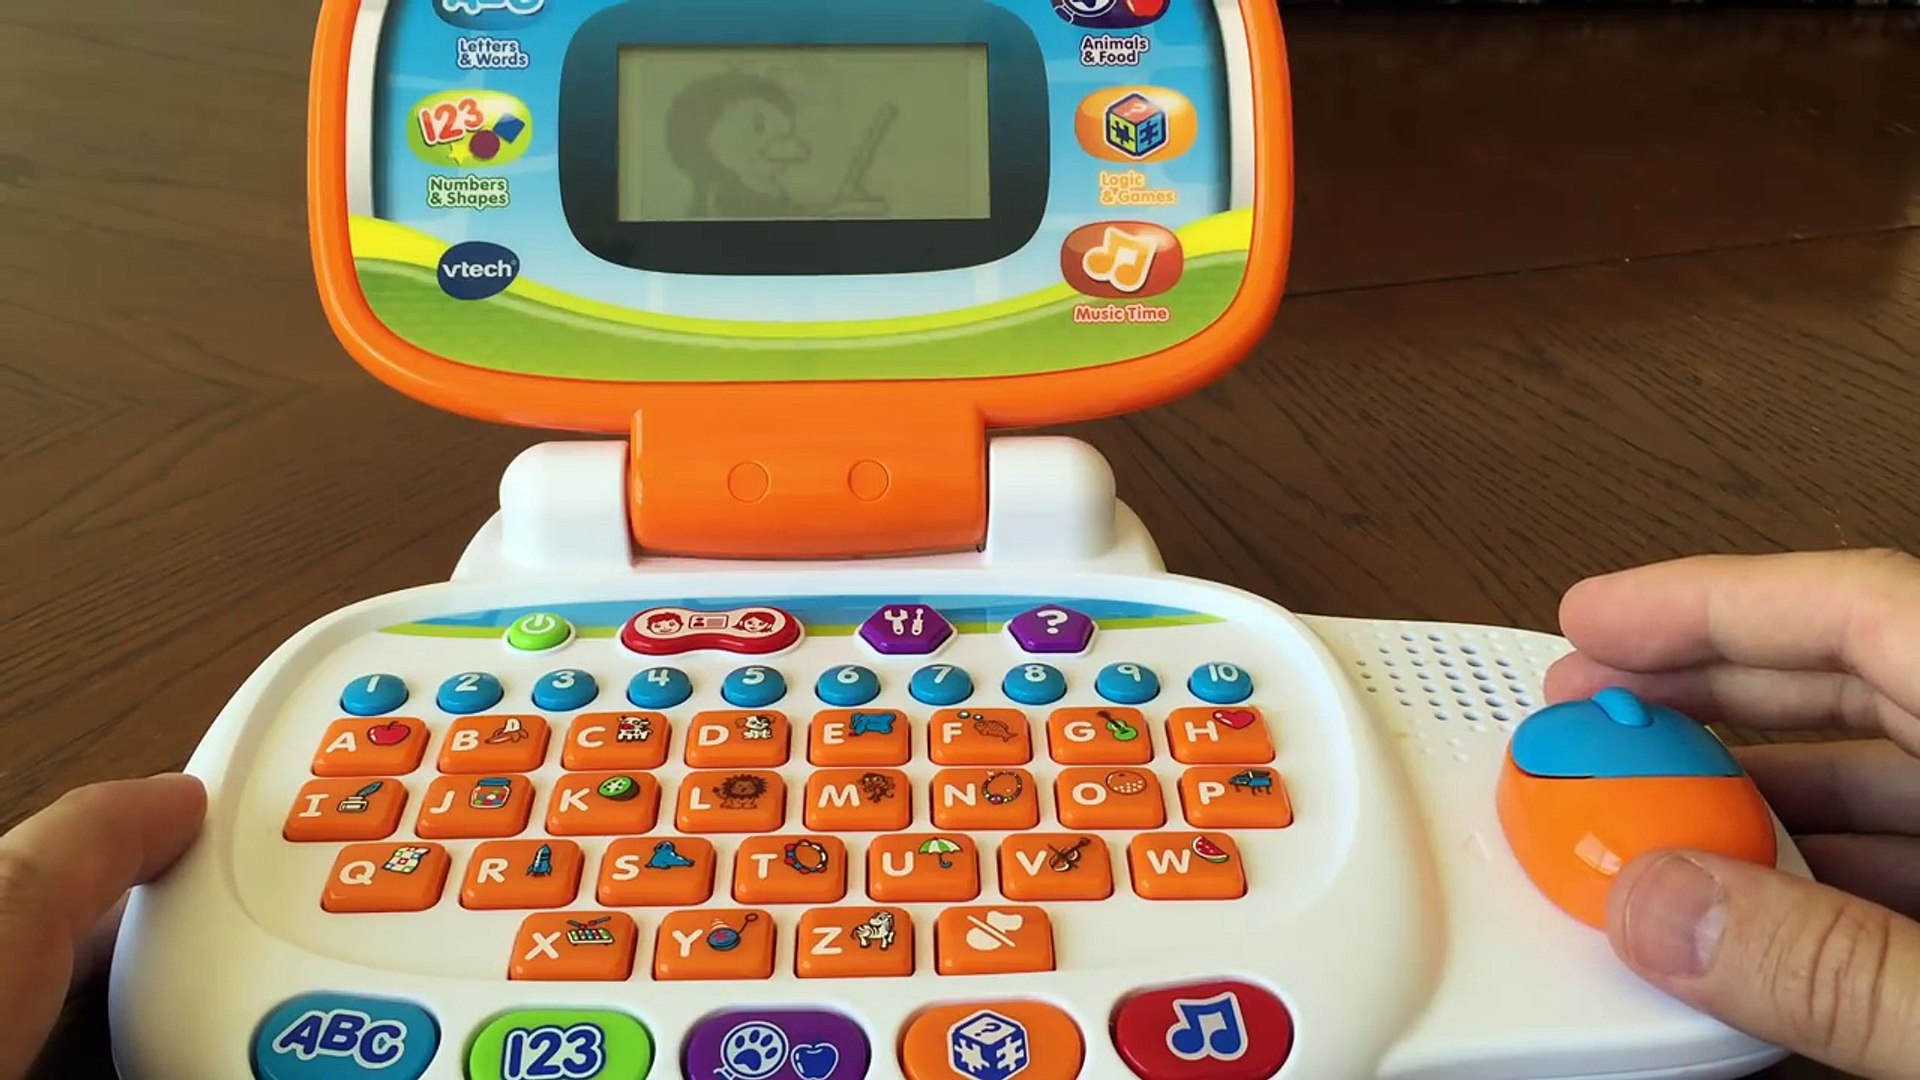 Toys, Vtech Tote N Go Laptop With Mouse